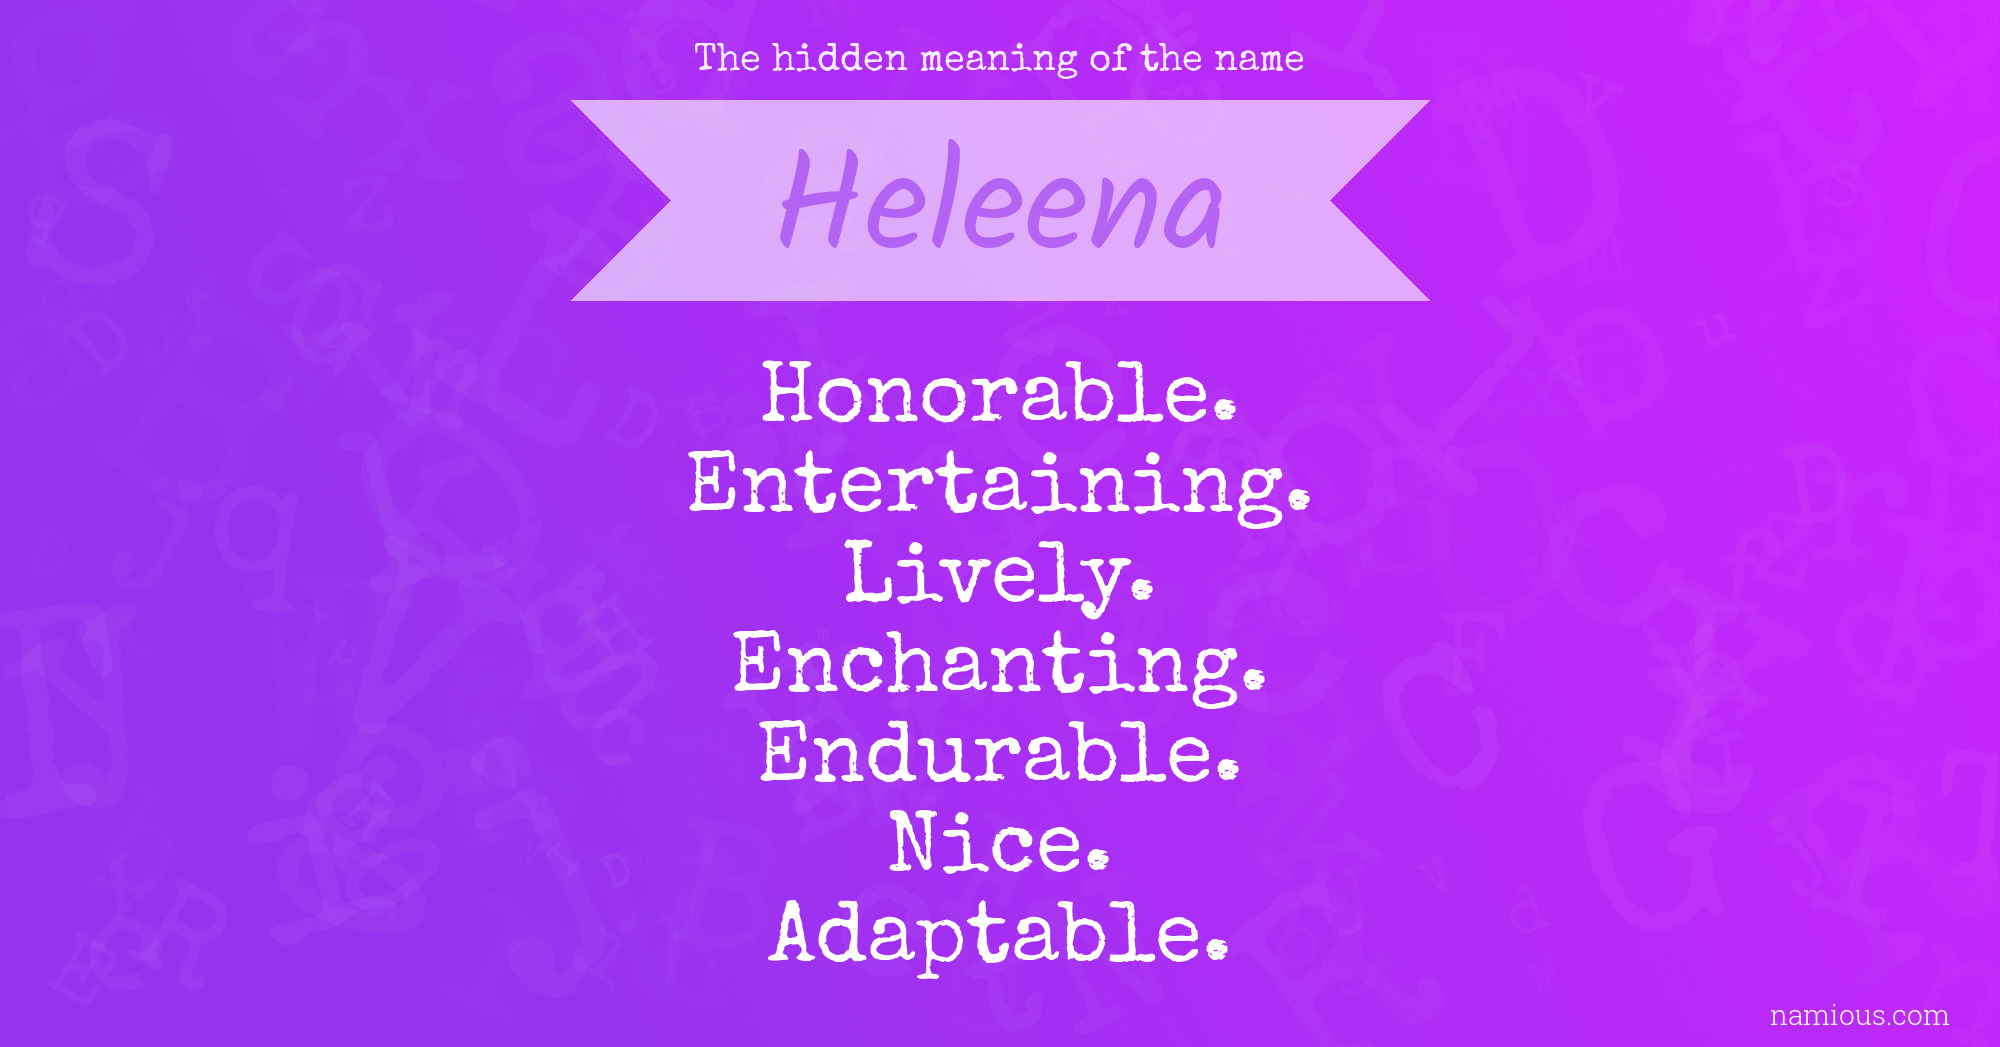 The hidden meaning of the name Heleena